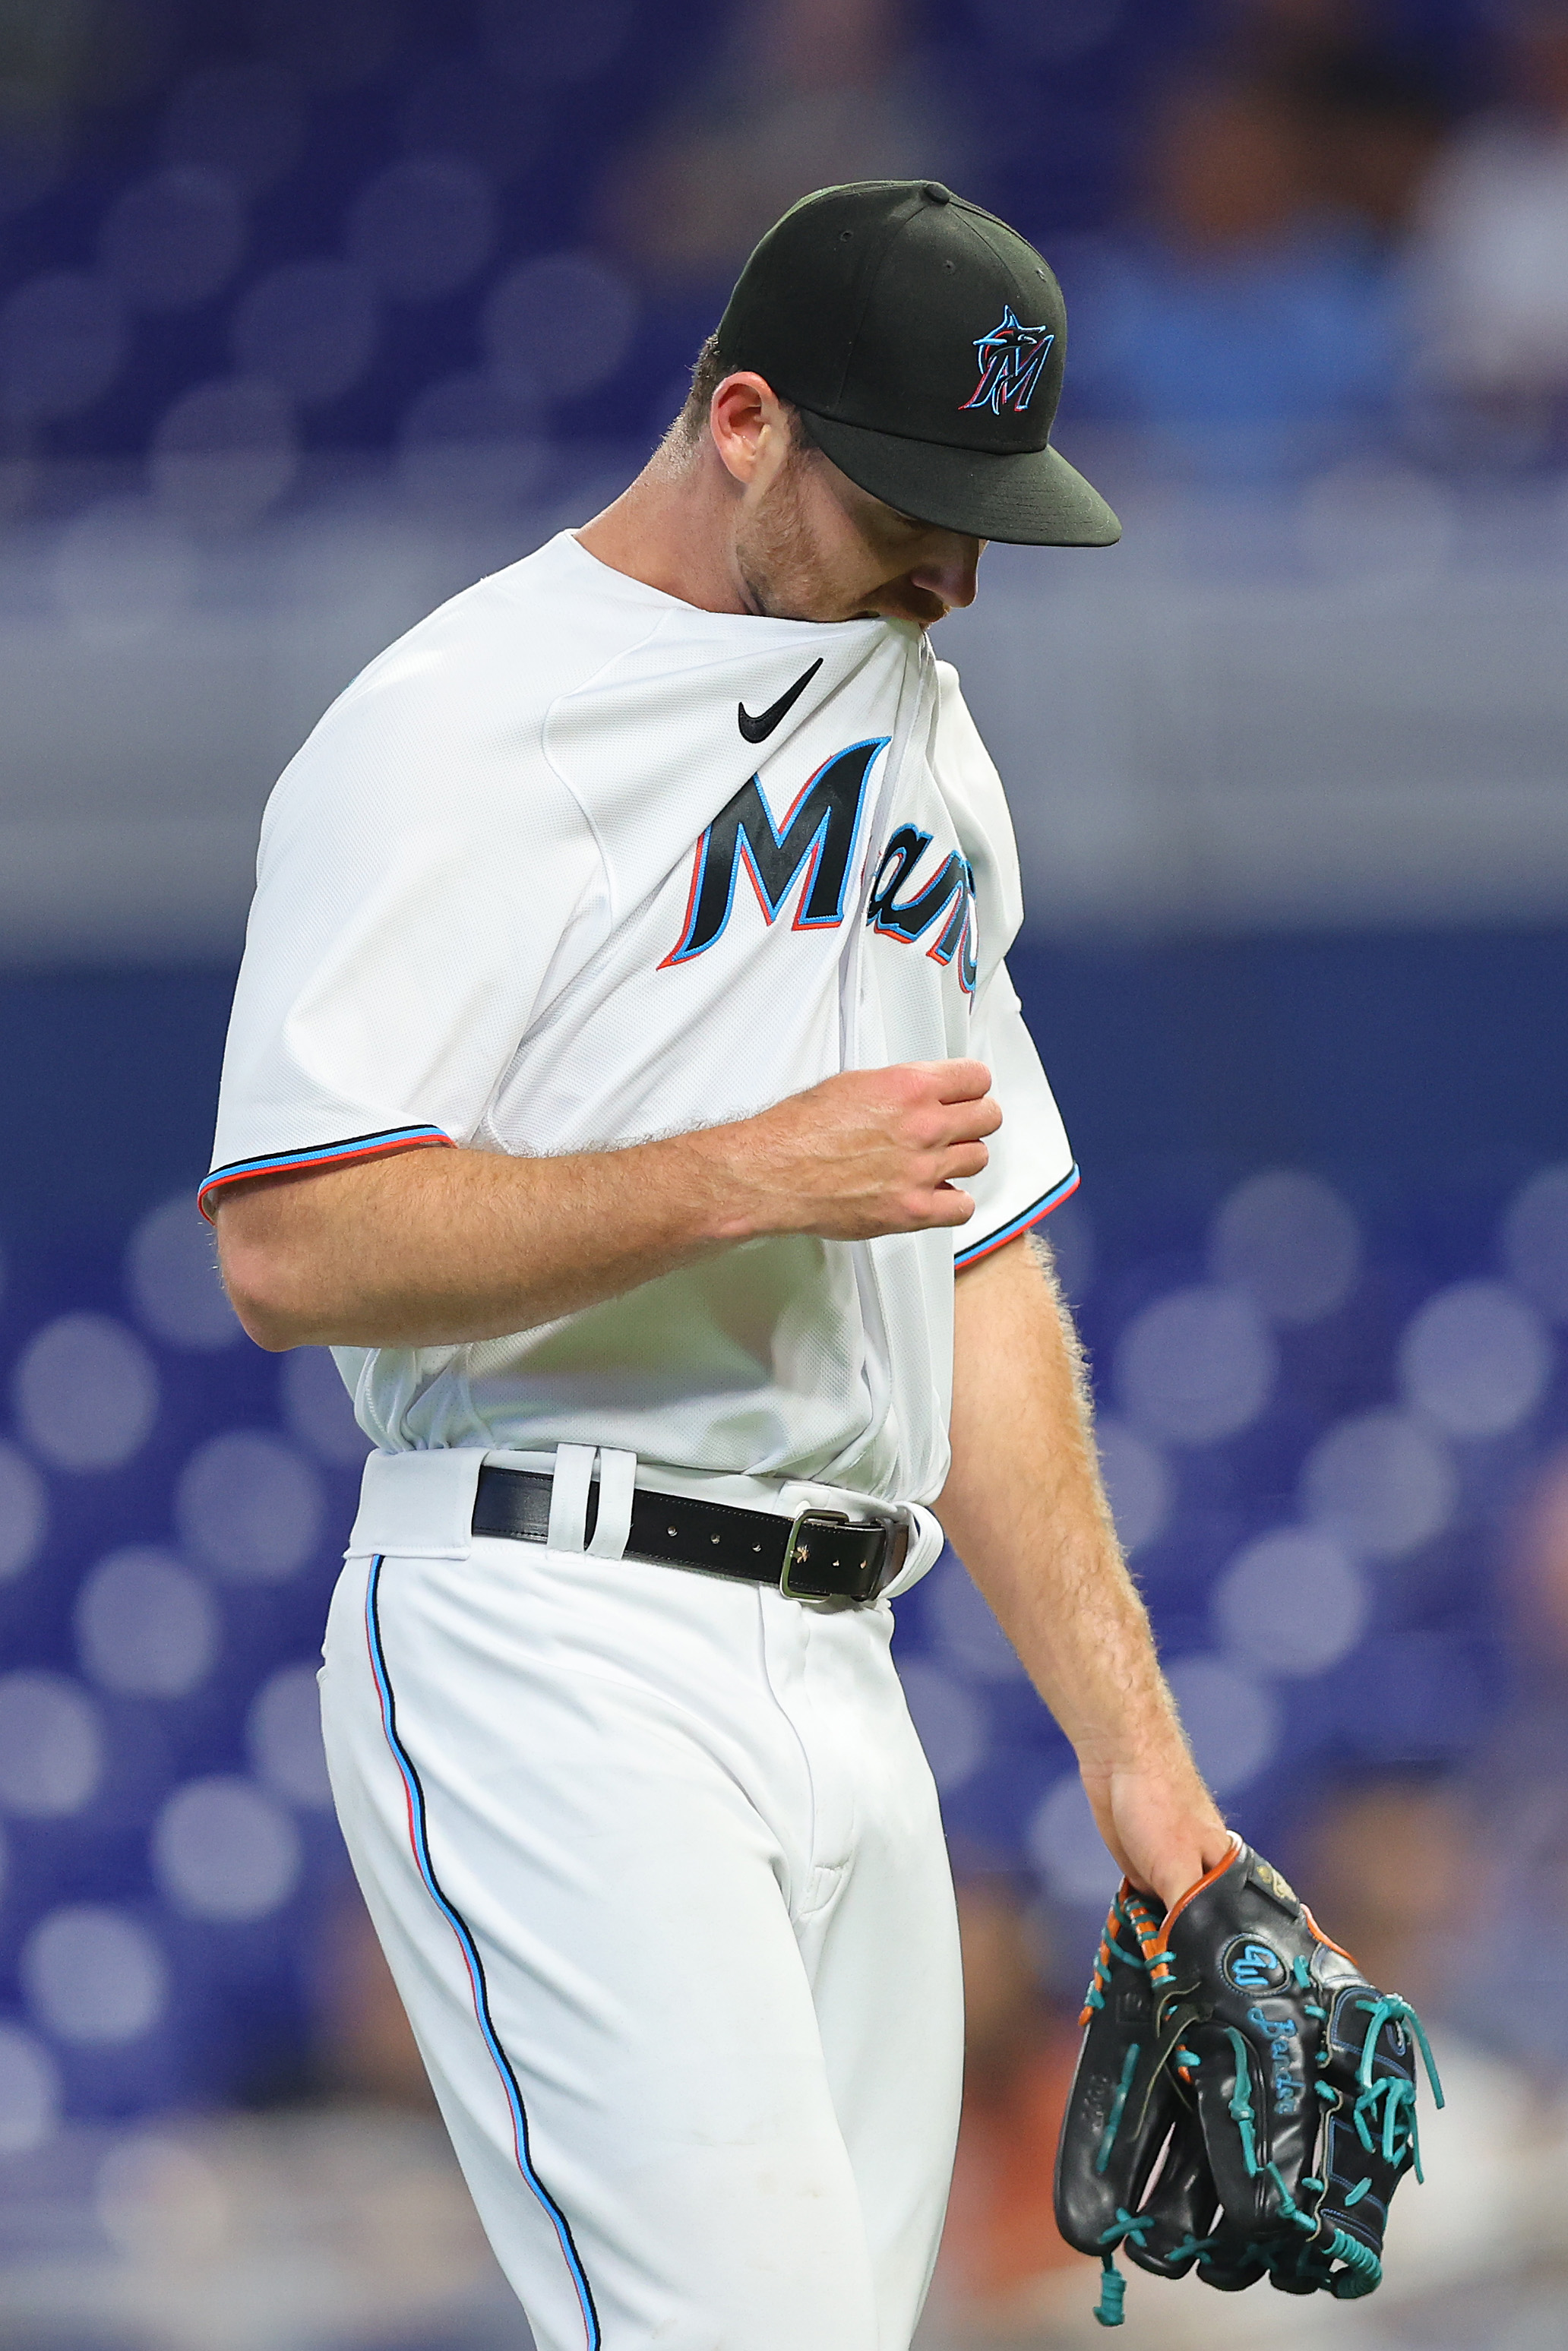 Anthony Bender #55 of the Miami Marlins reacts after allowing a home run to Pavin Smith #26 of the Arizona Diamondbacks (not pictured) during the ninth inning at loanDepot park